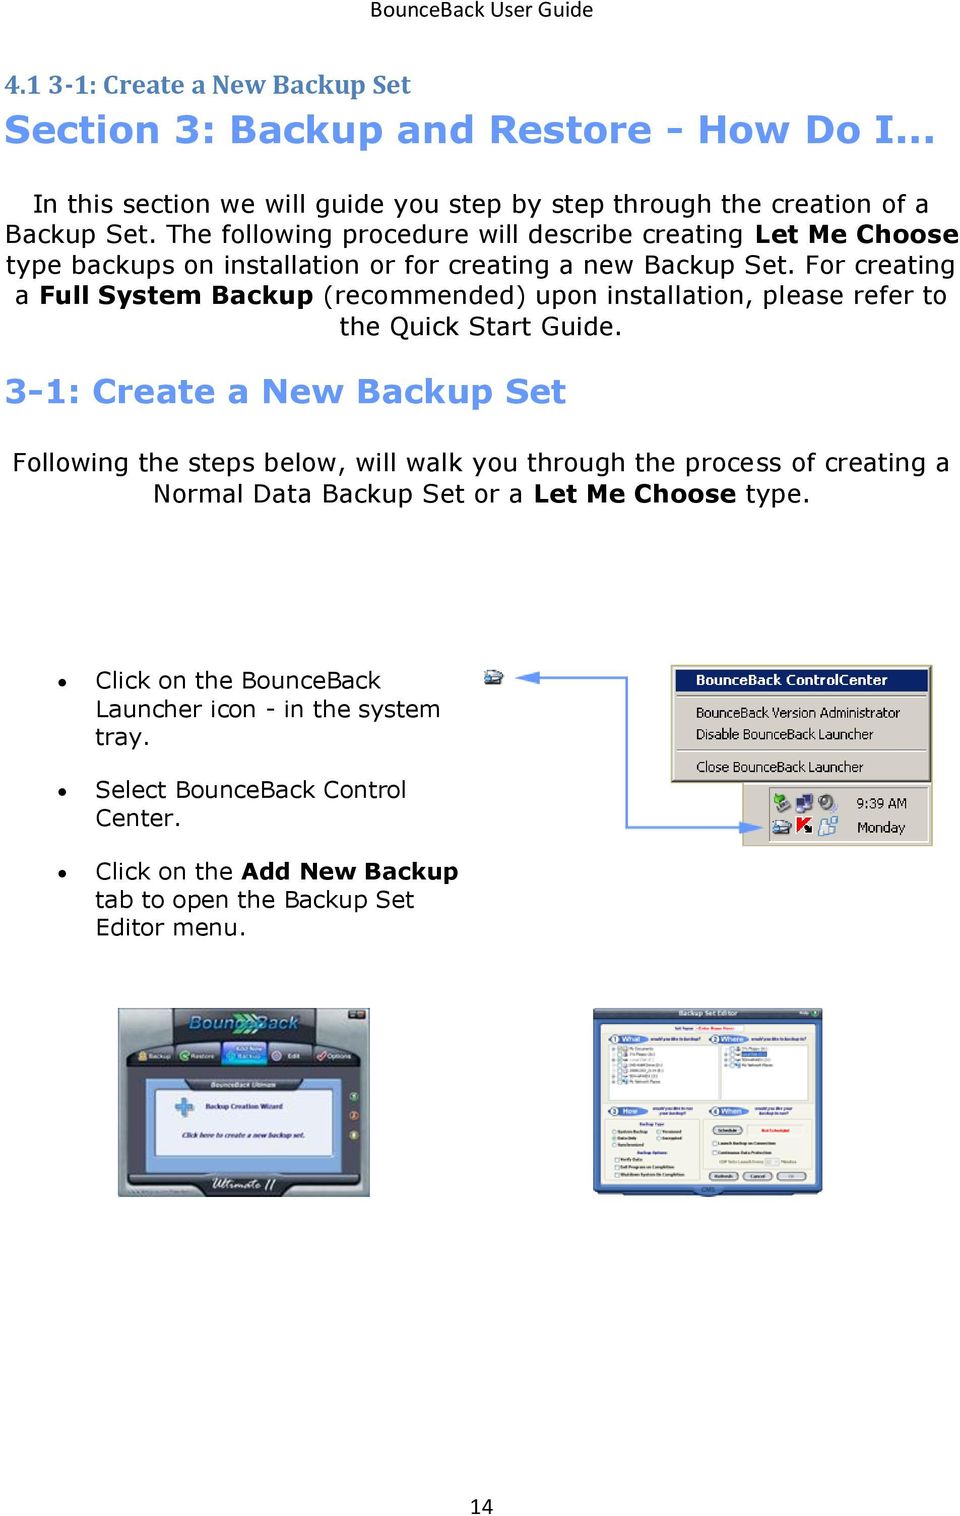 For creating a Full System Backup (recommended) upon installation, please refer to the Quick Start Guide.